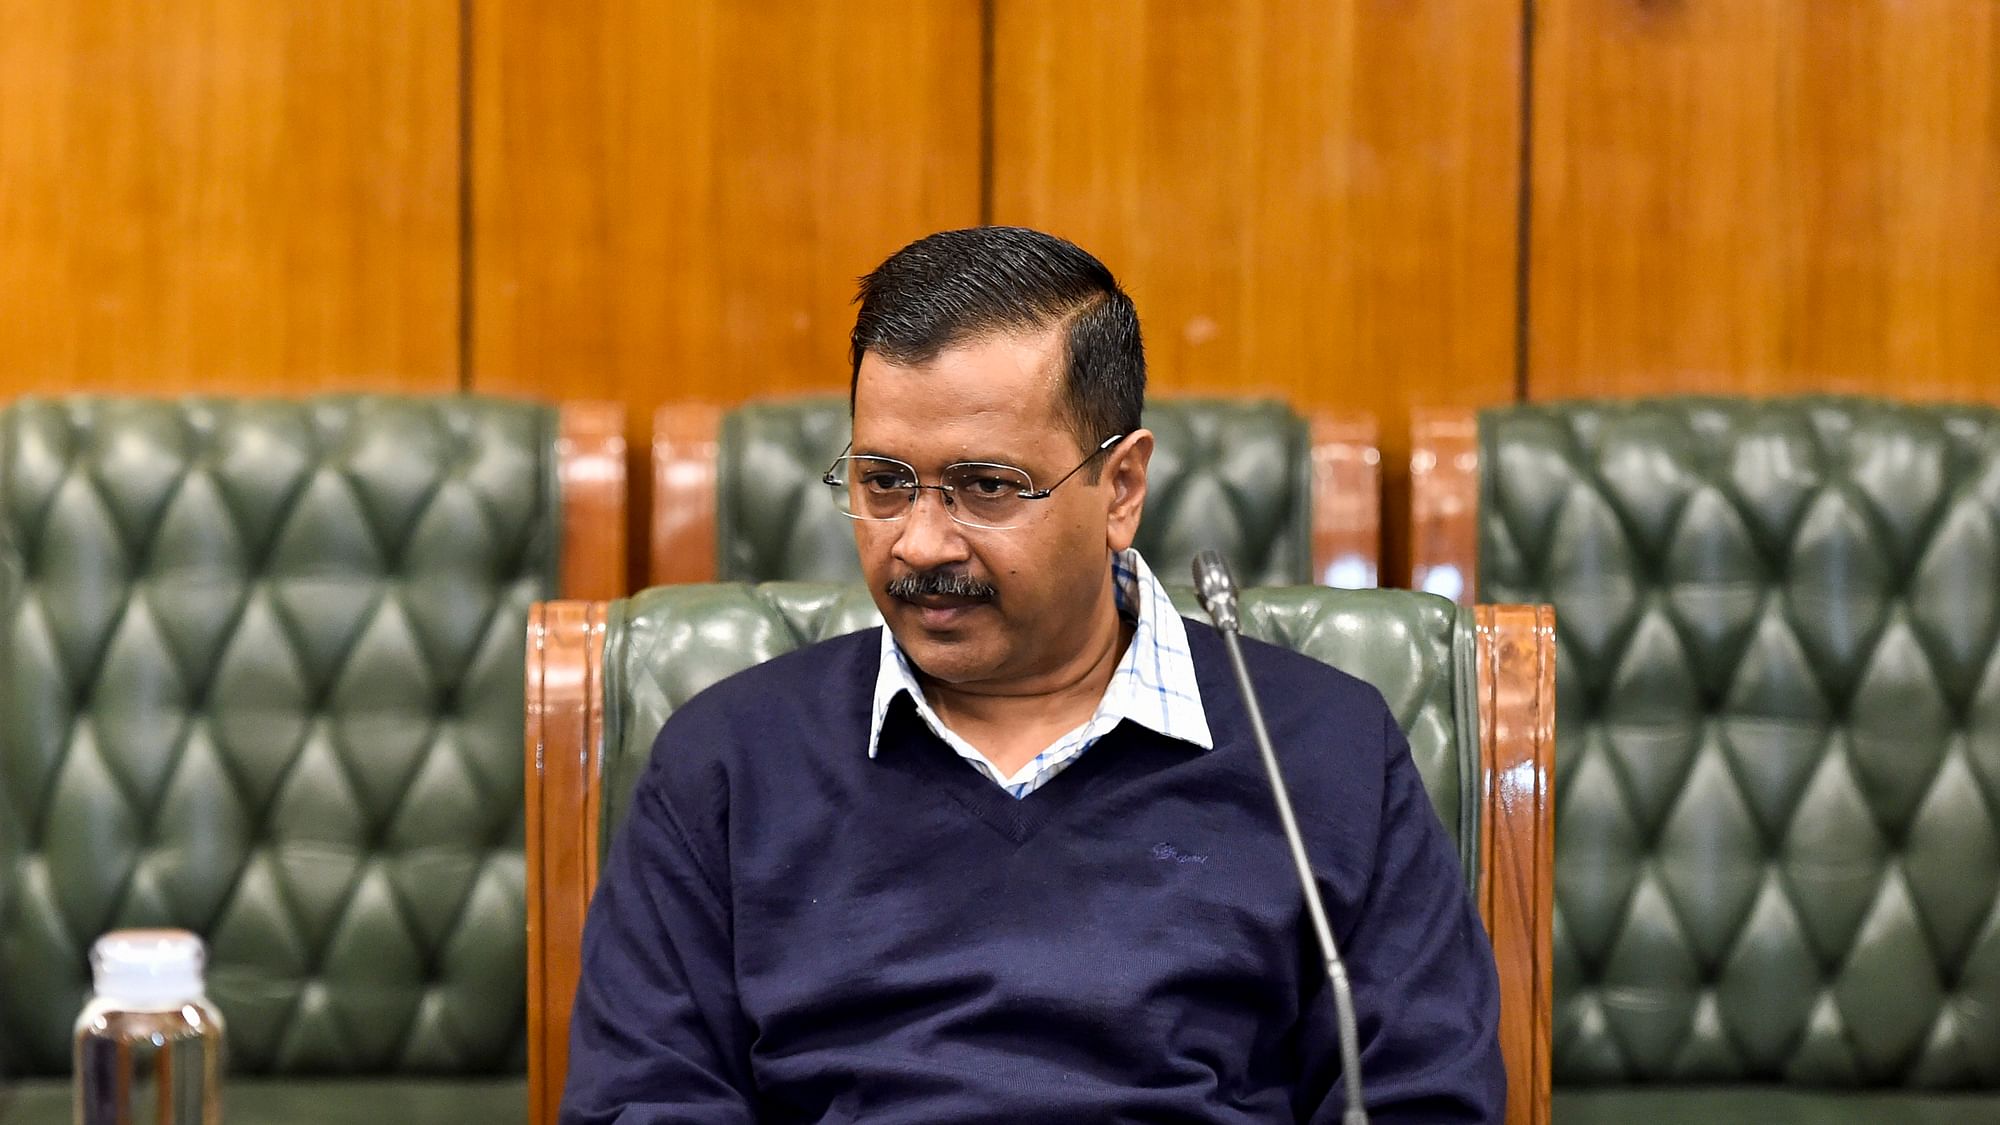 Delhi Chief Minister Arvind Kejriwal on Tuesday, 25 February, visited Mahatma Gandhi’s memorial in Rajghat and said violence will not benefit anyone.